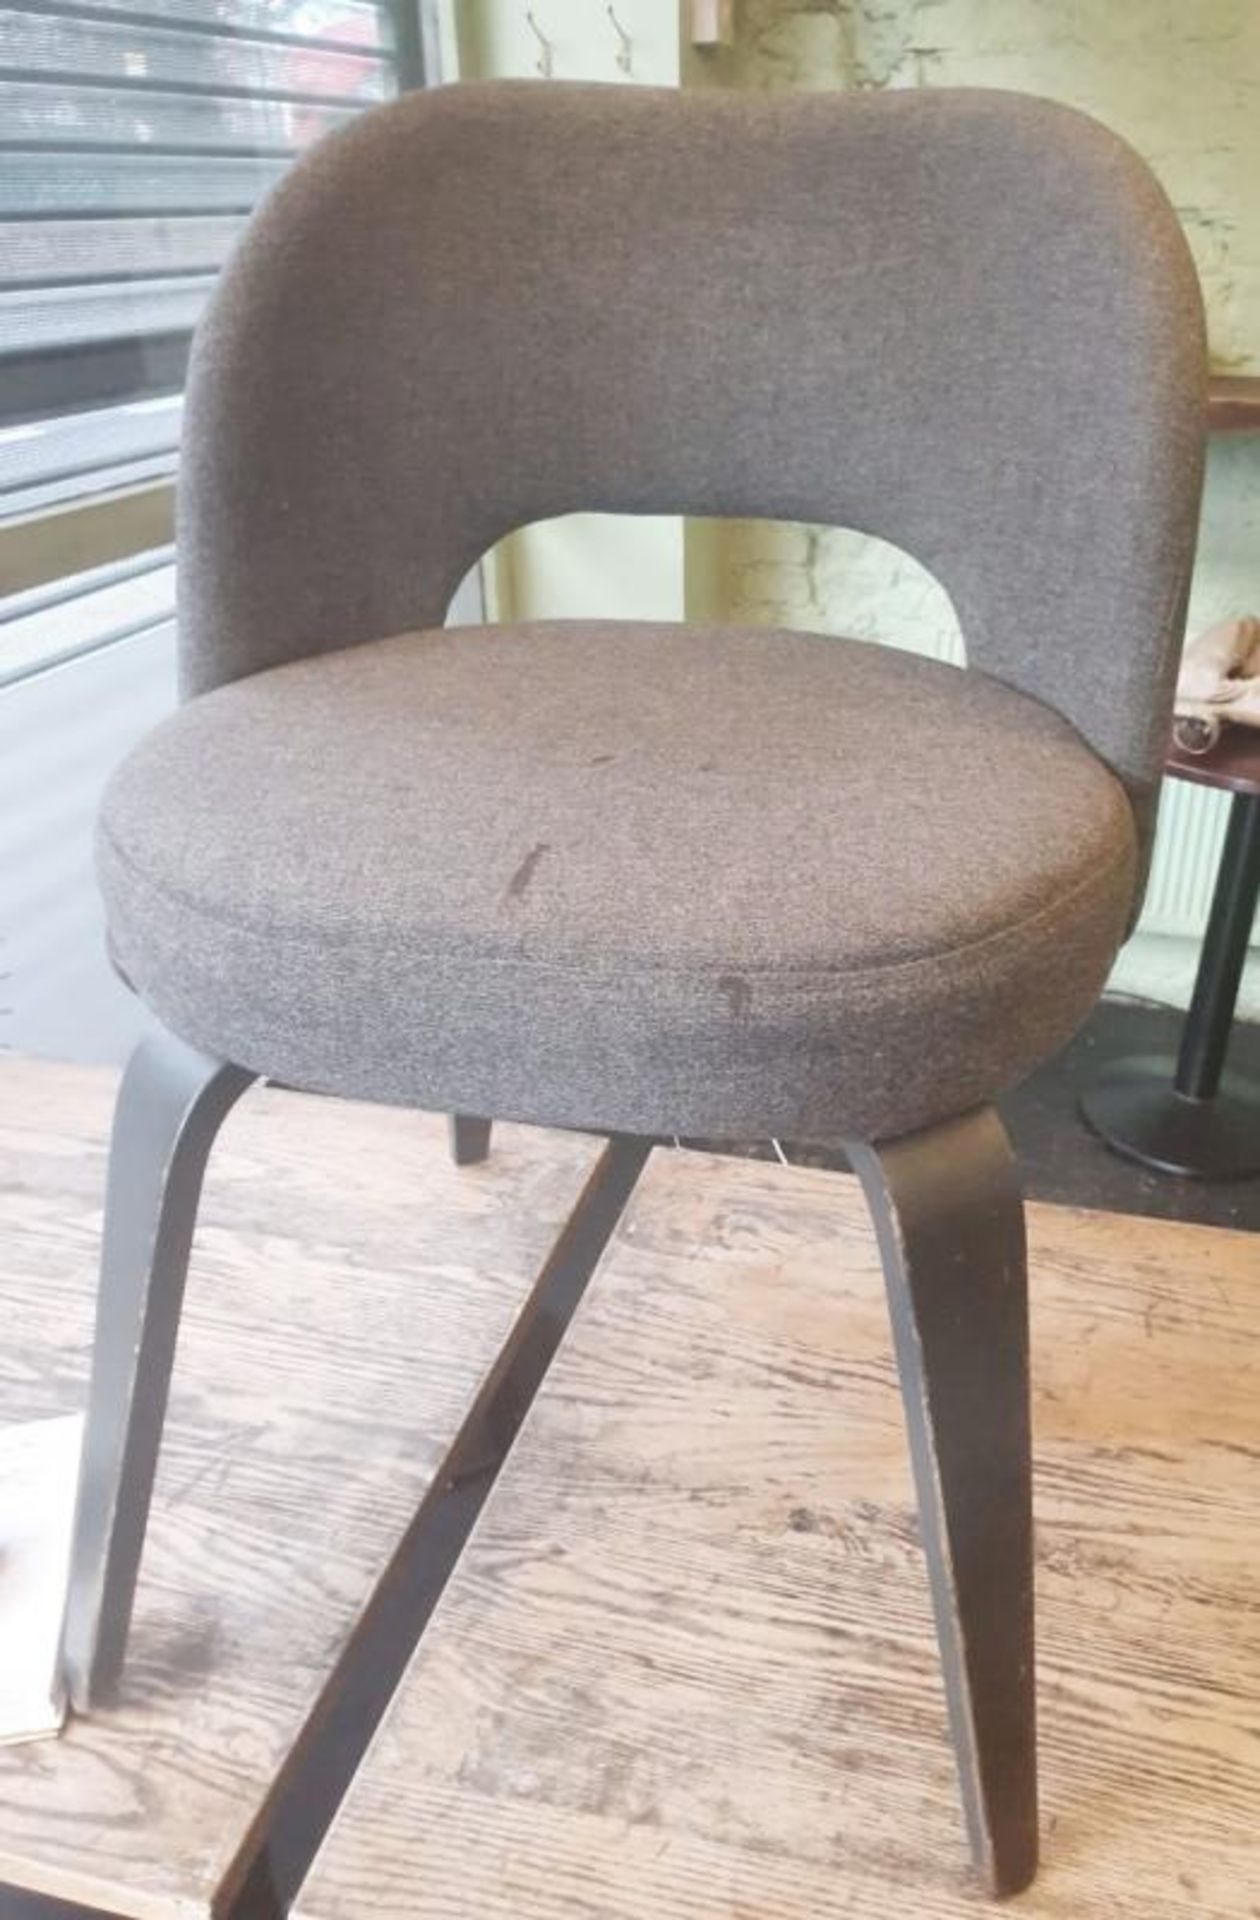 1 x Stylish Chair Upholstered In A Light Grey Fabric - Recently Taken From A Contemporary Caribbean - Bild 3 aus 6